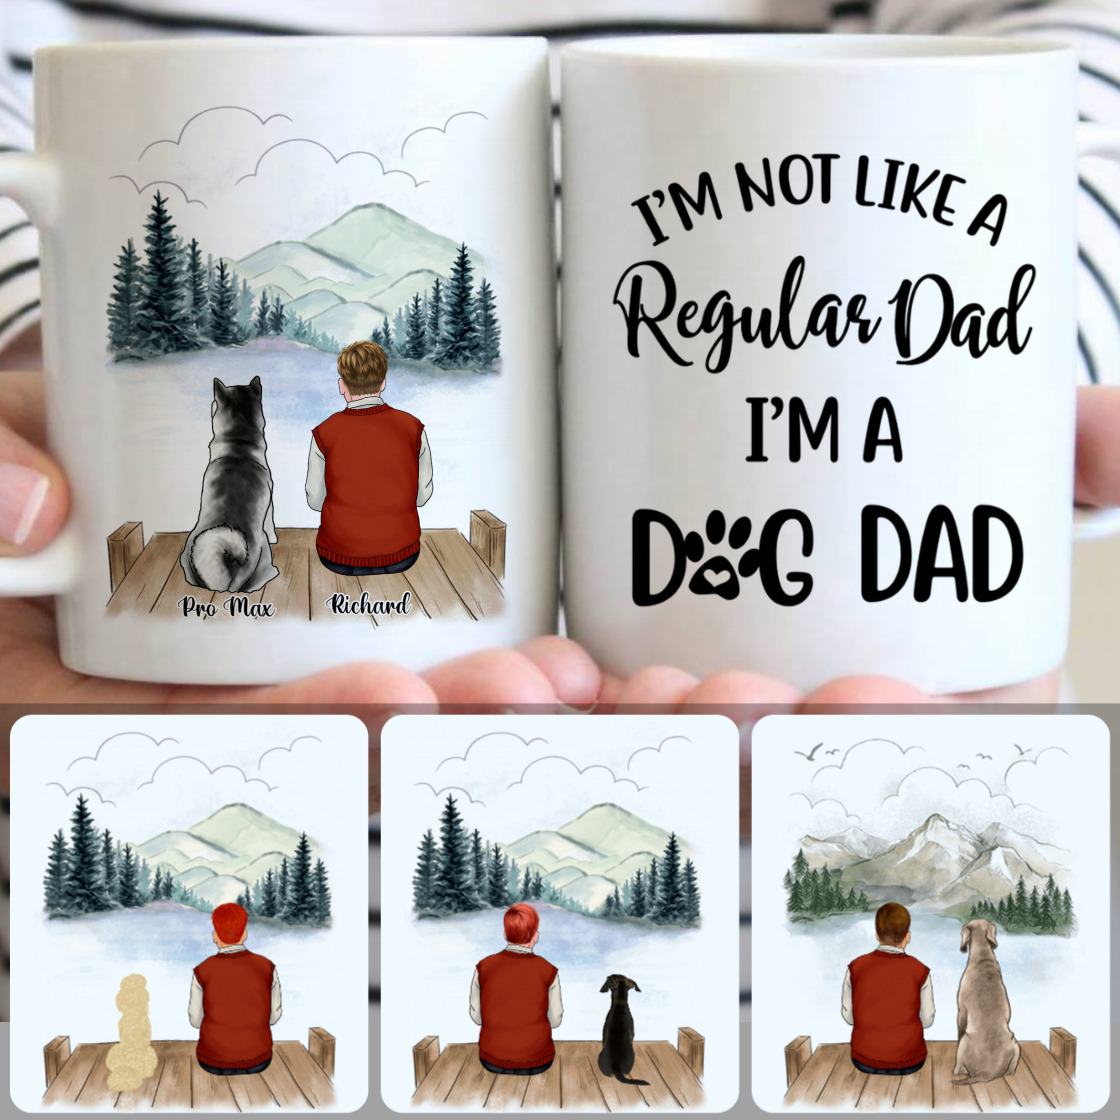 Personalized Mug, Meaningful Gifts For Brothers, Old Man & Dog Customized Coffee Mug With Names